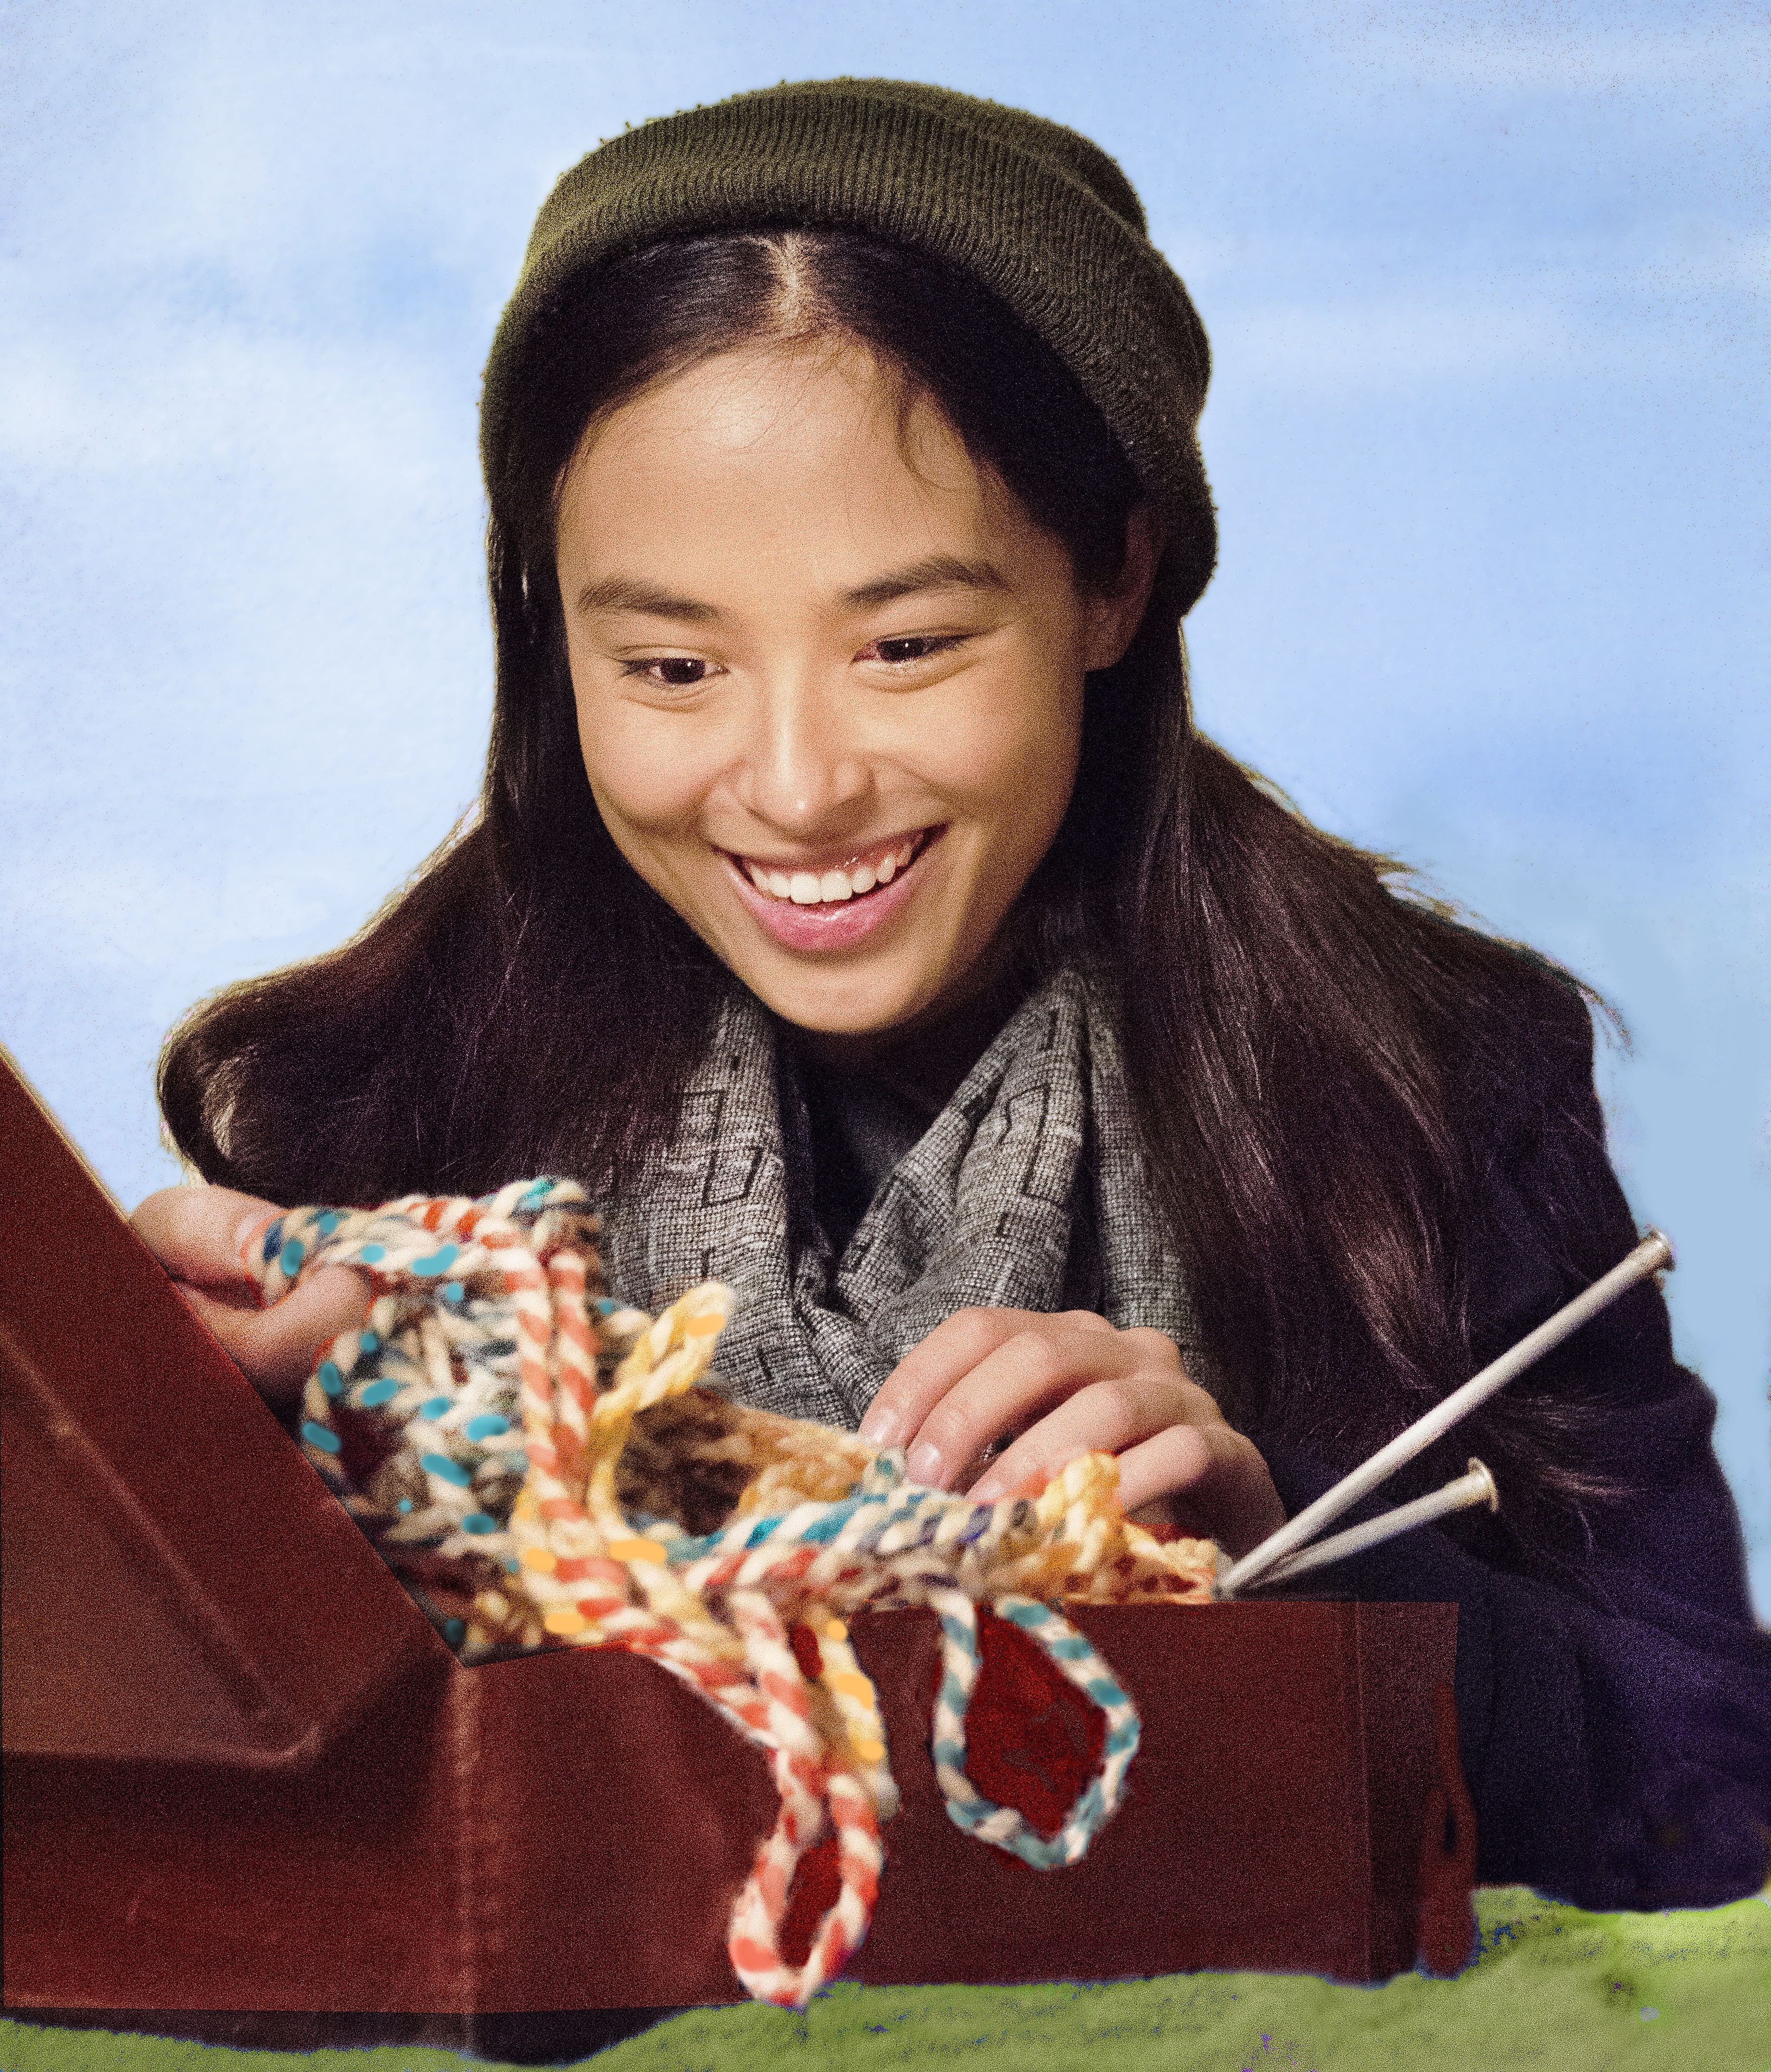 KidSeries Announces the World Premiere of Extra Yarn